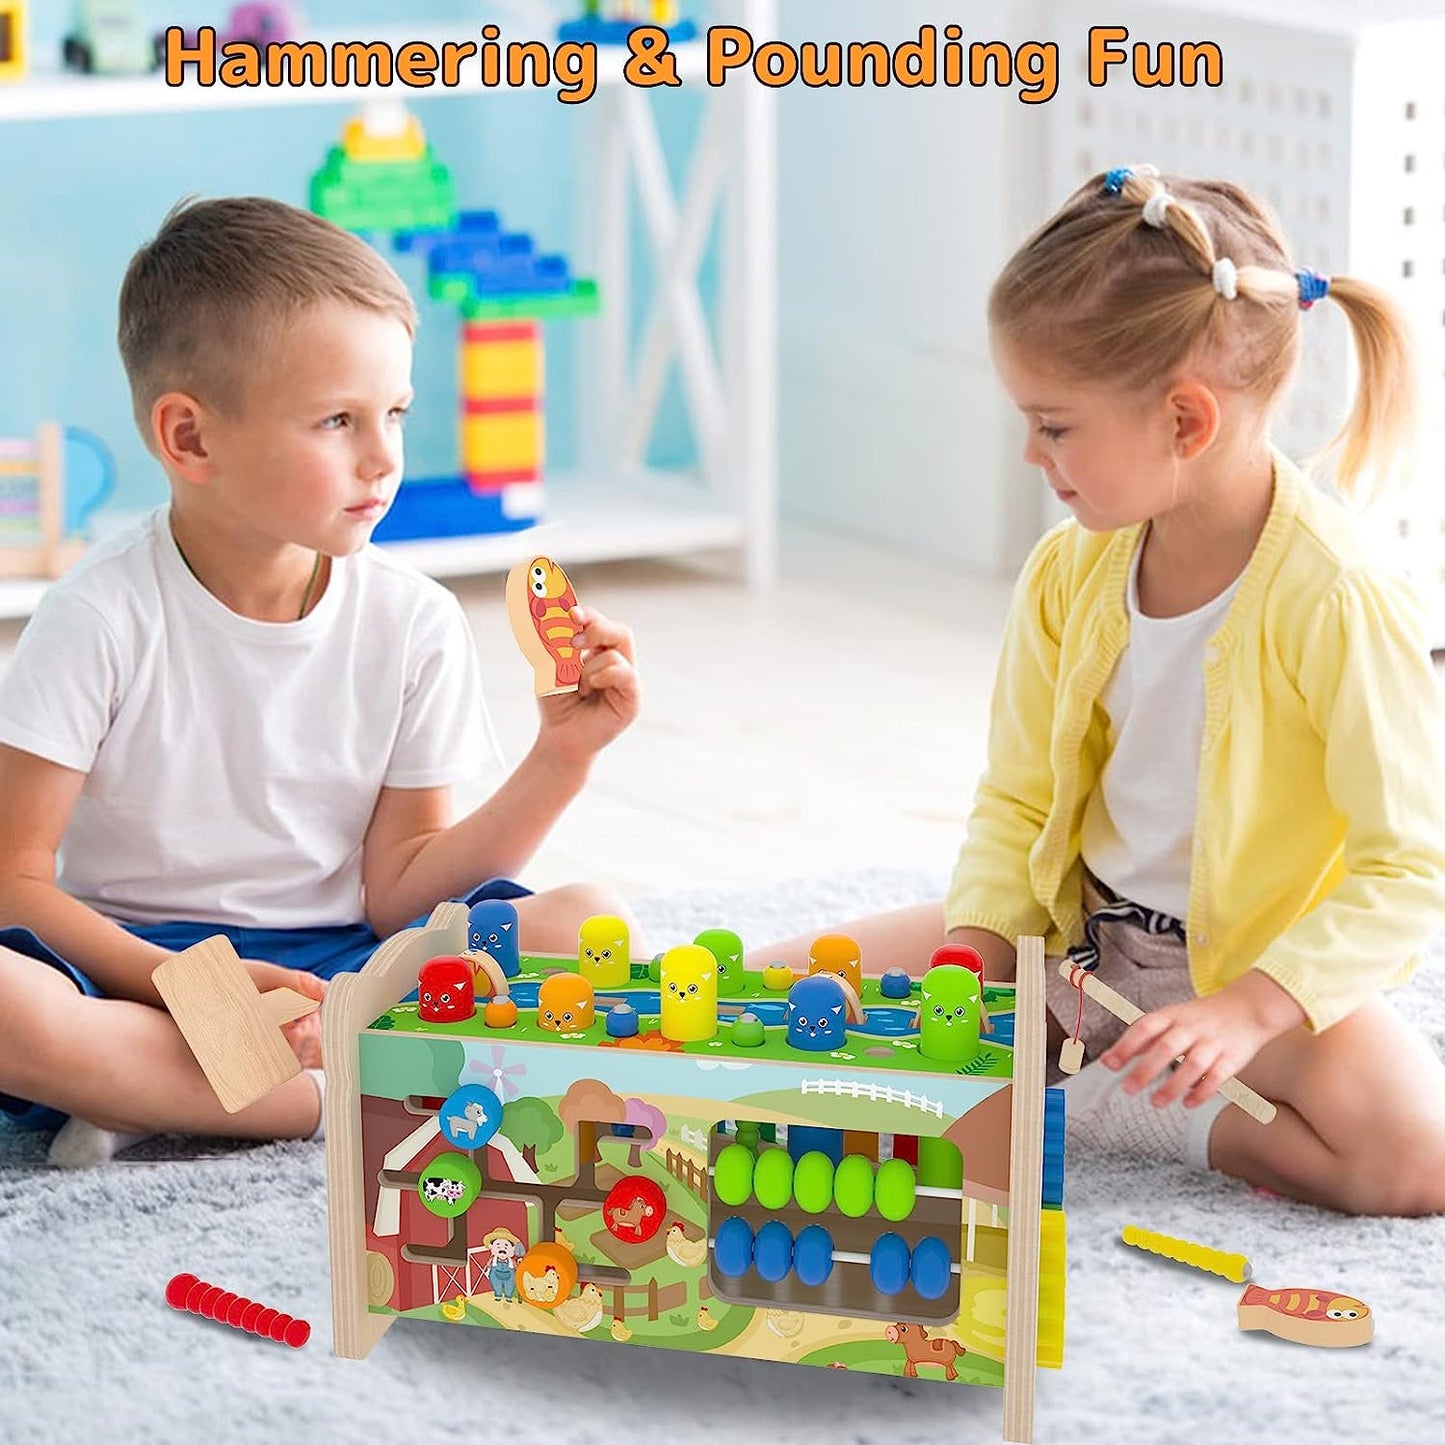 8 in 1 Toys for 1+ Year Old, Wooden Hammering Pounding Toys for Toddlers, Whack a mole Fishing Game Xylophone Preschool Learning Educational Toys, Kids Birthday Gifts for 1 2 3 4 Year Old